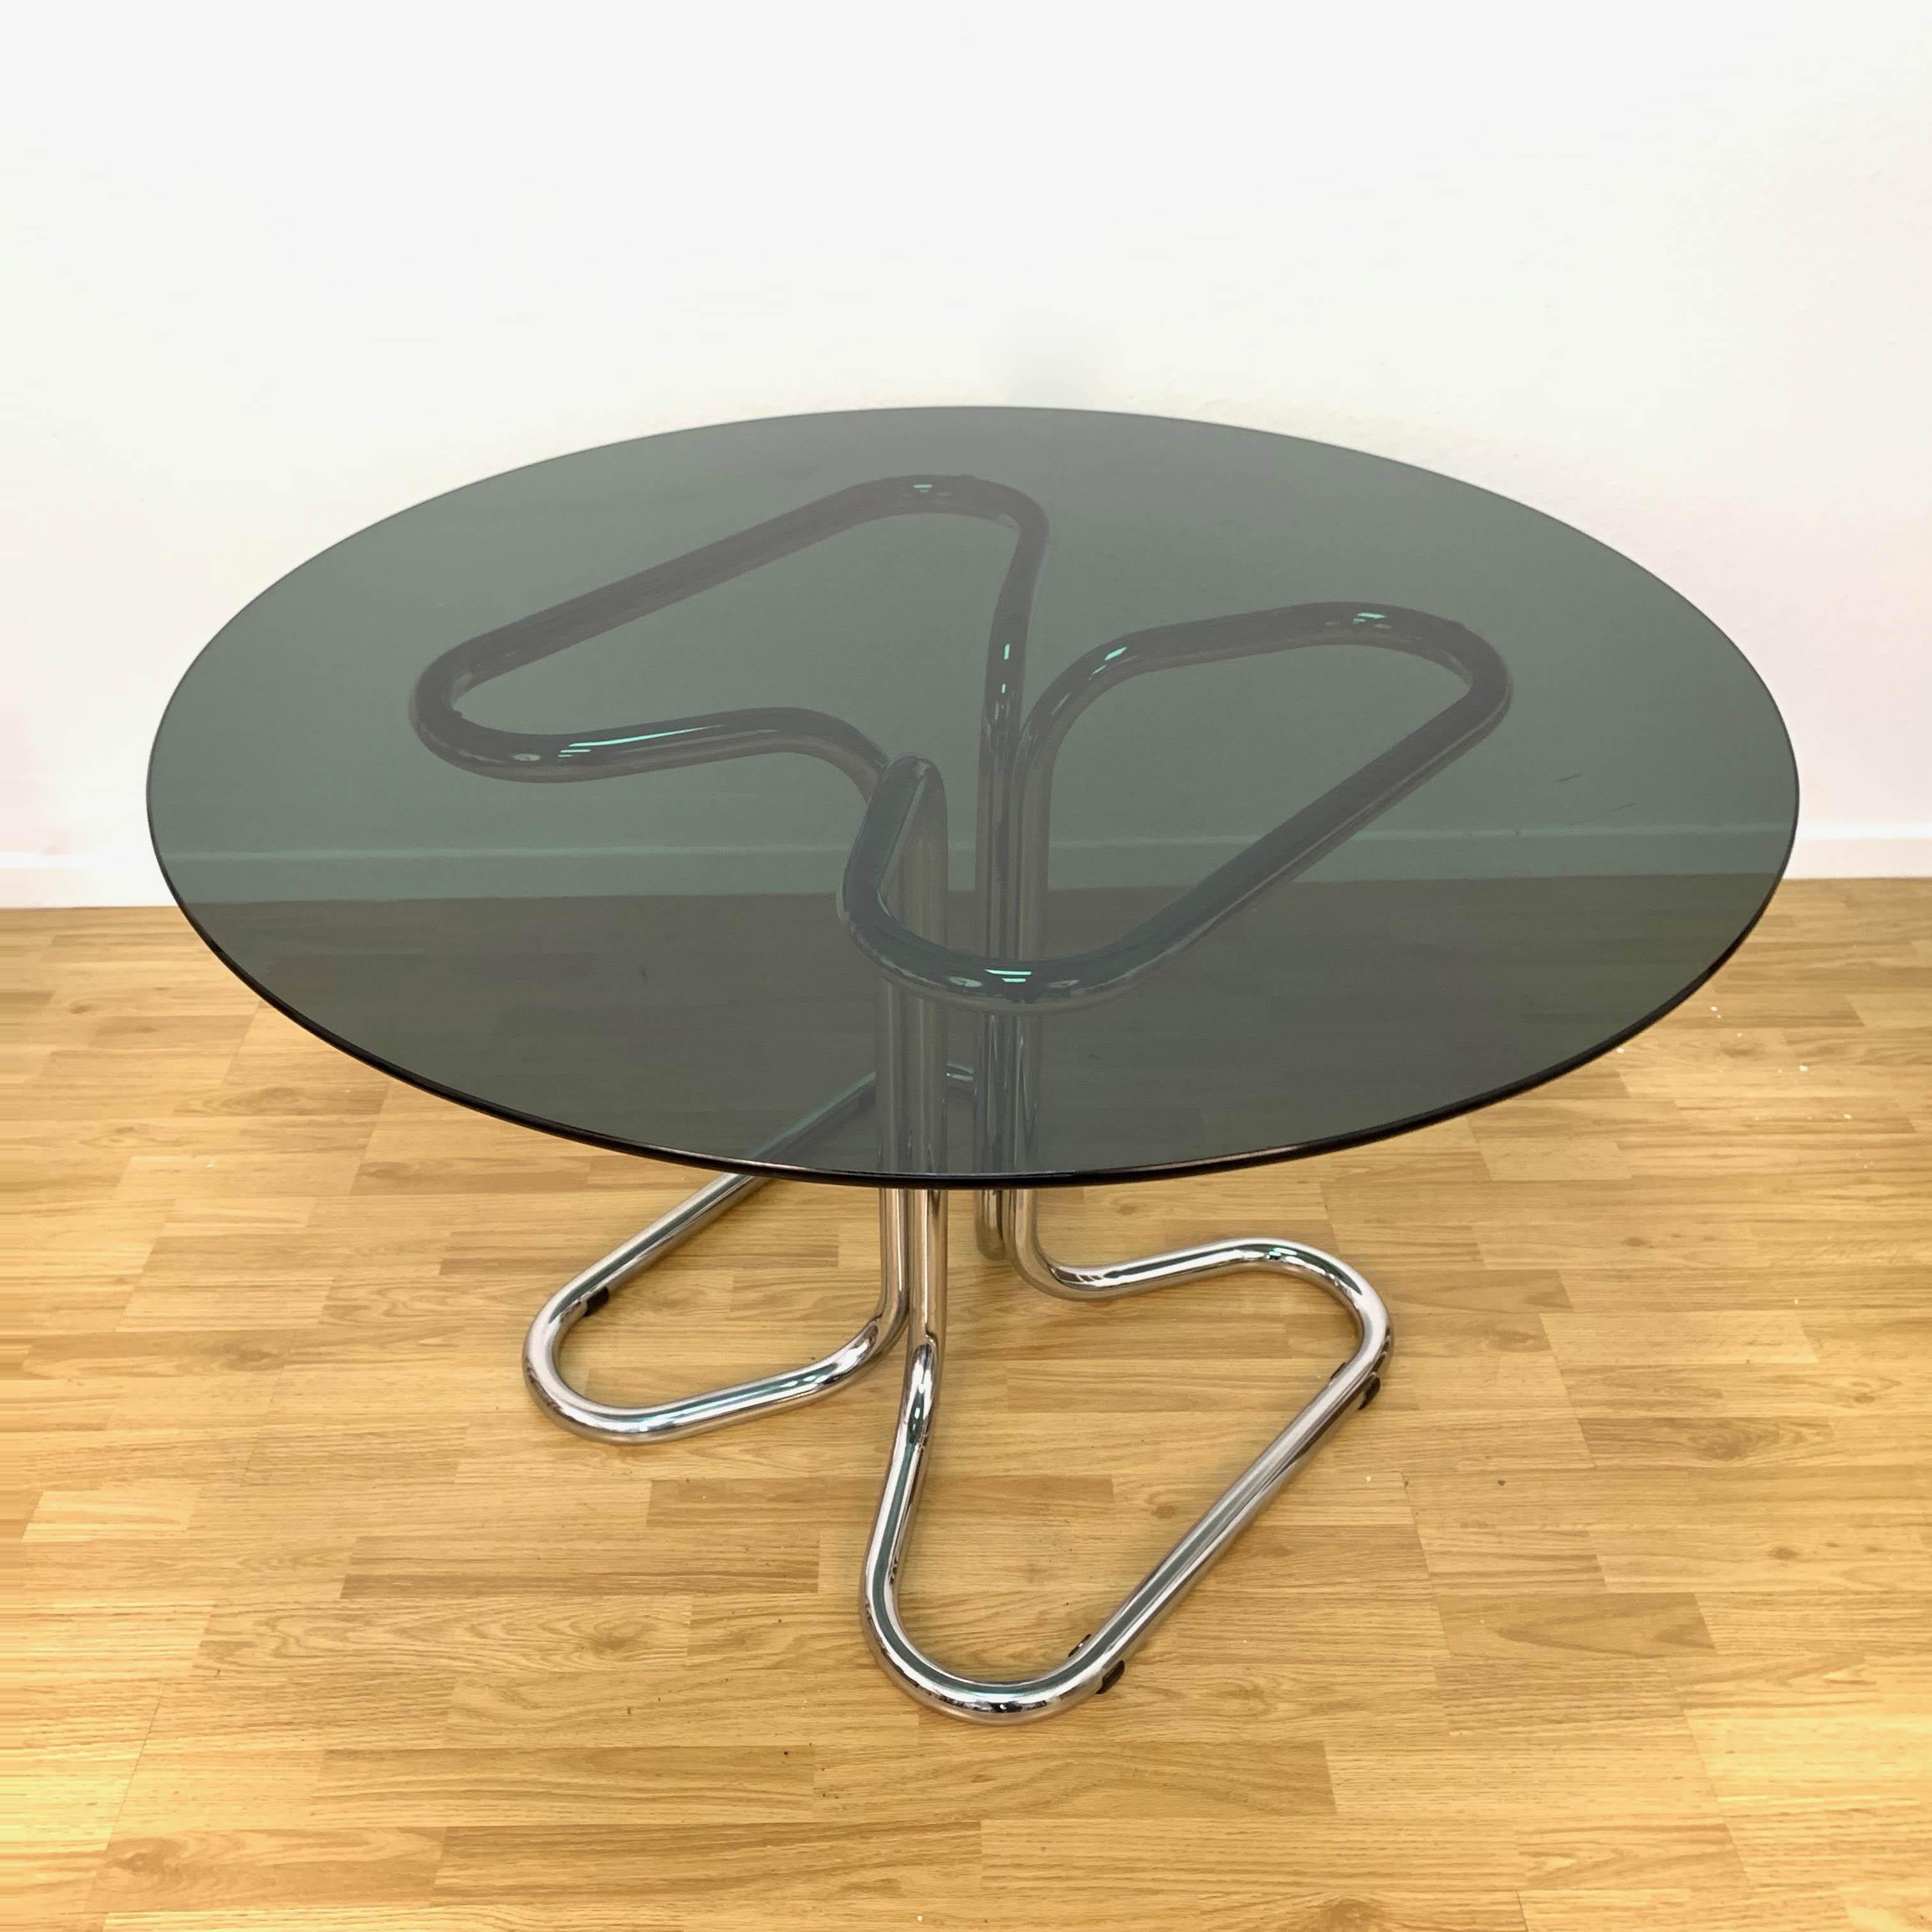 giotto stoppino table